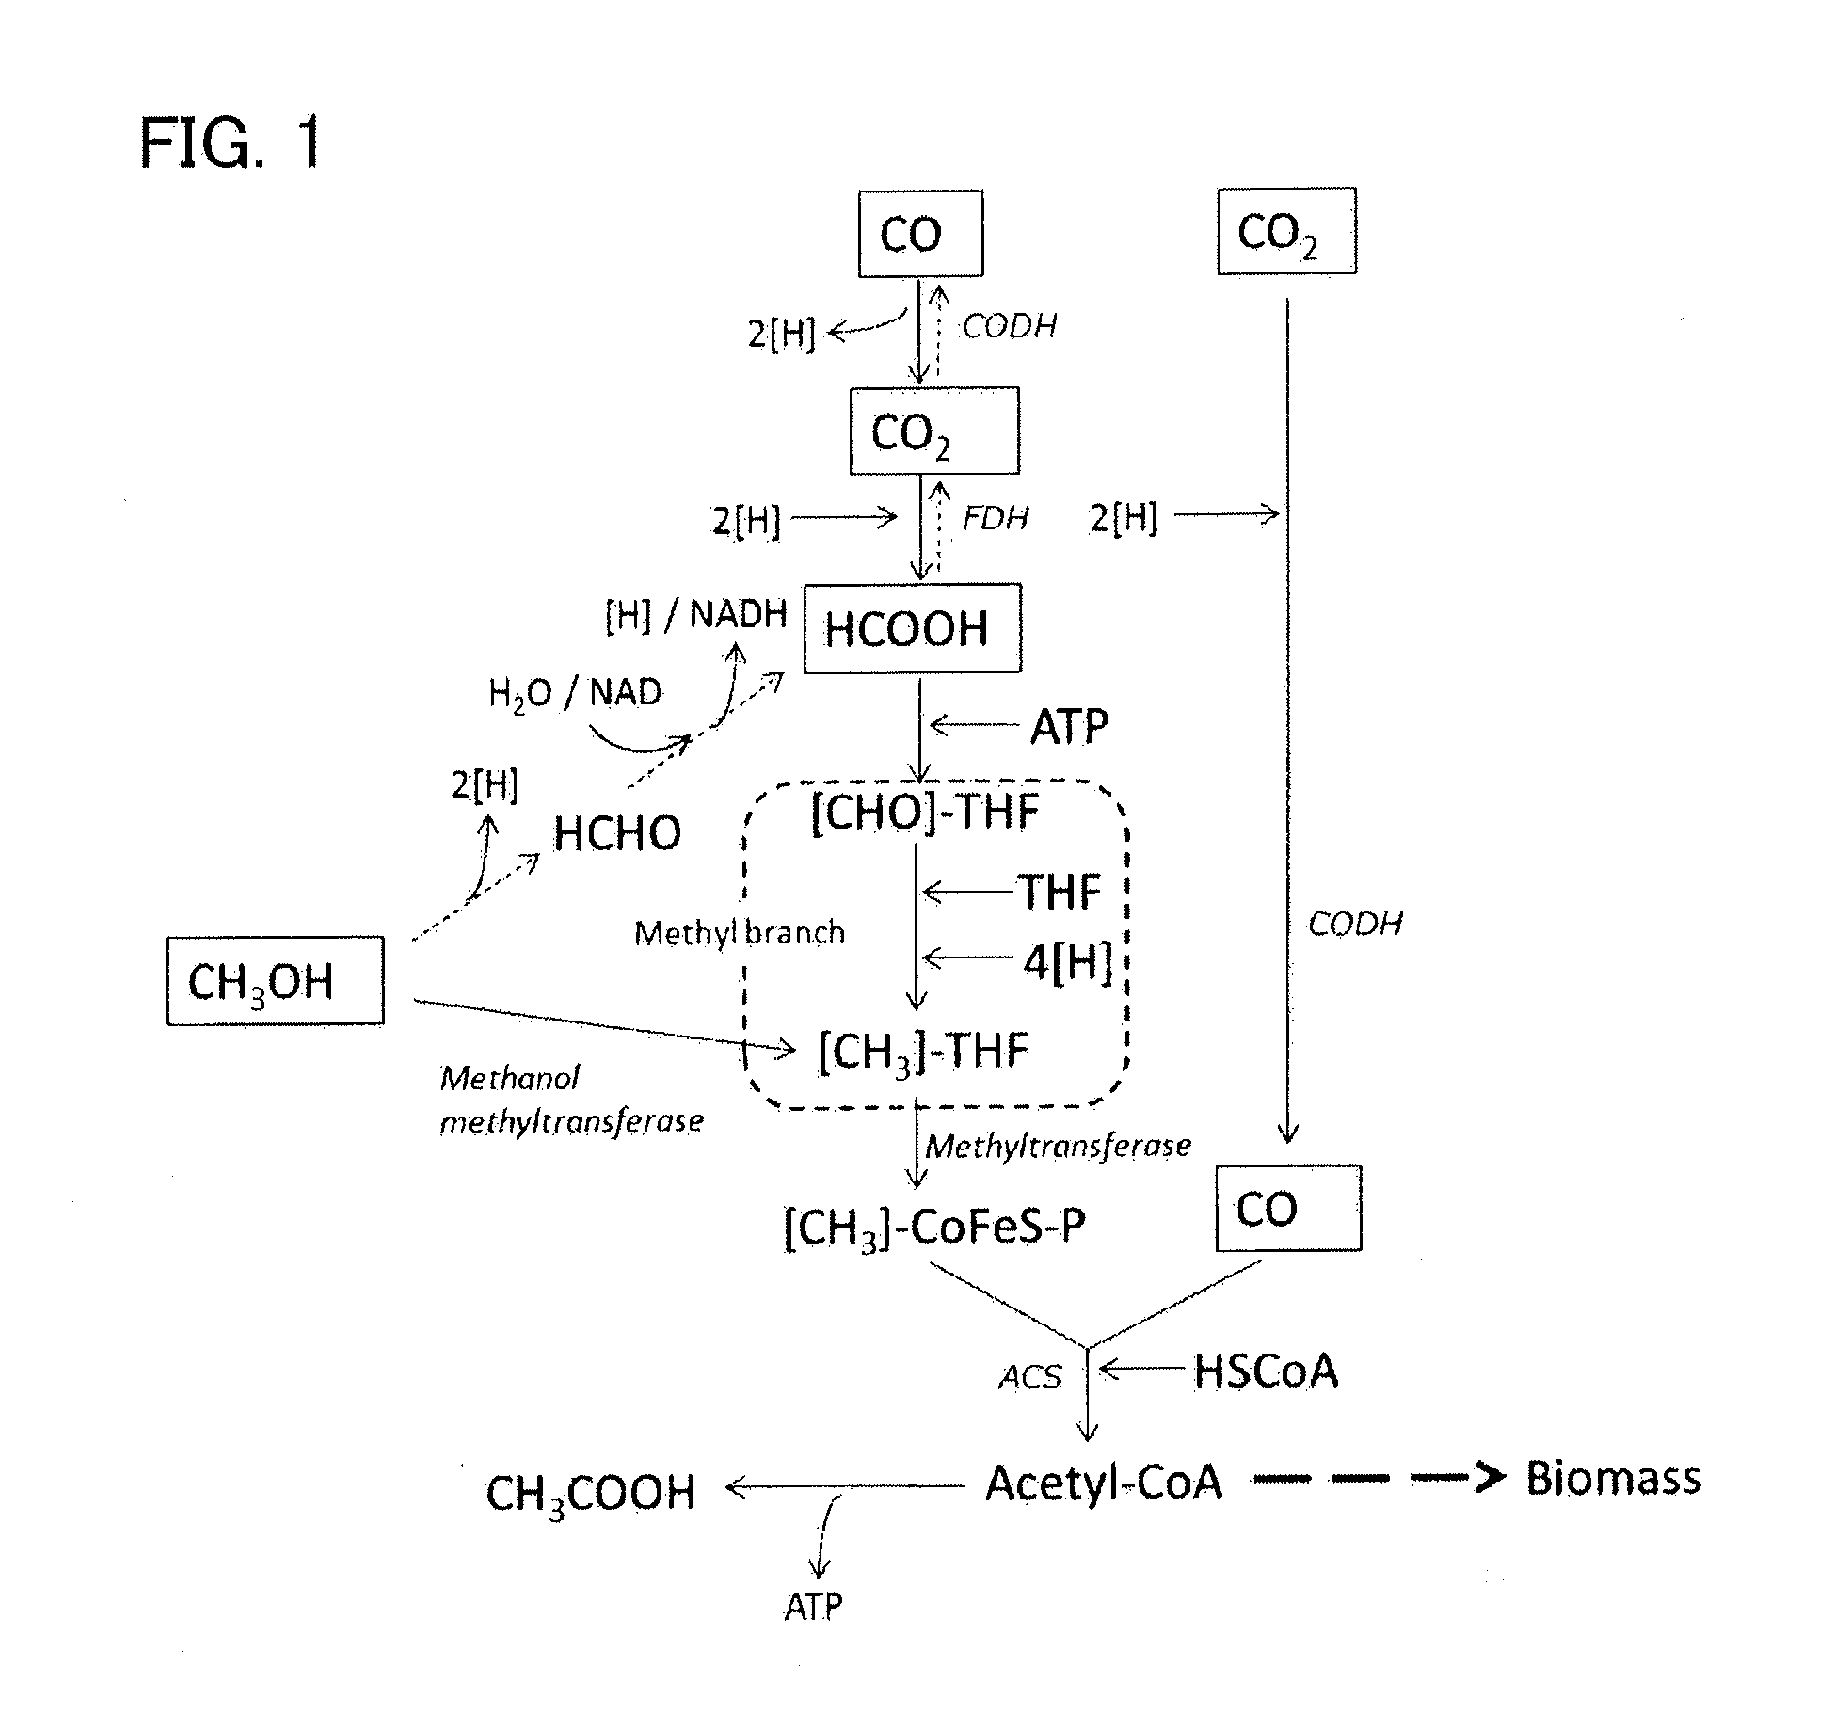 Recombinant cell, and method for producing isoprene